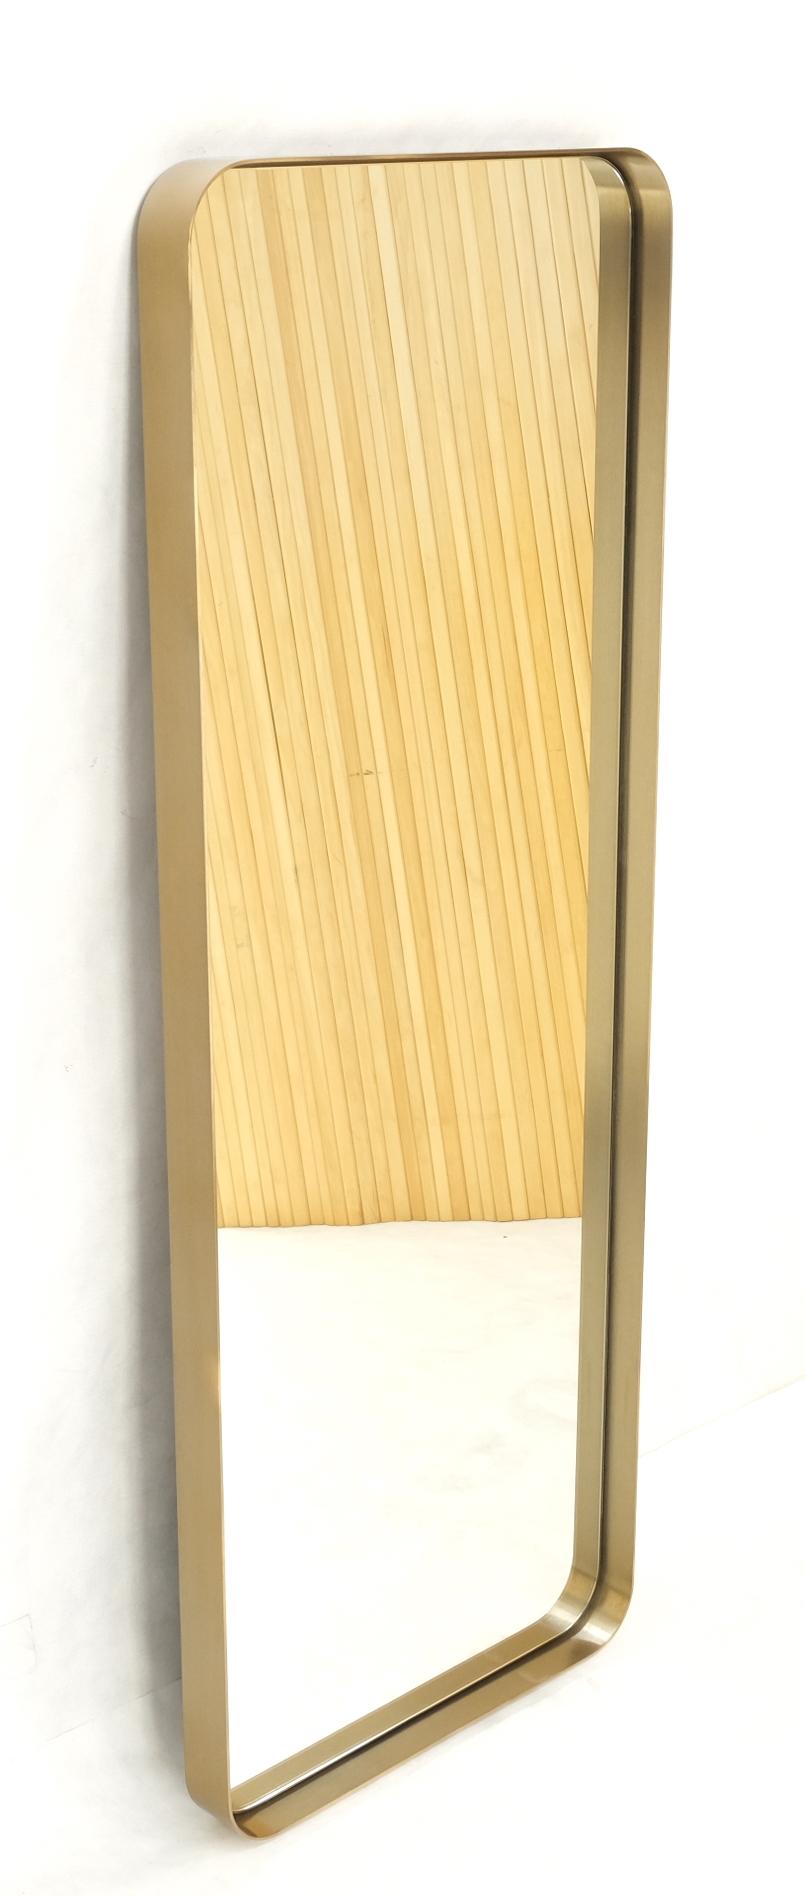 Bent Brushed Brass Frame Rounded Corners Mid Century Modern Wall Mirror Mint 8